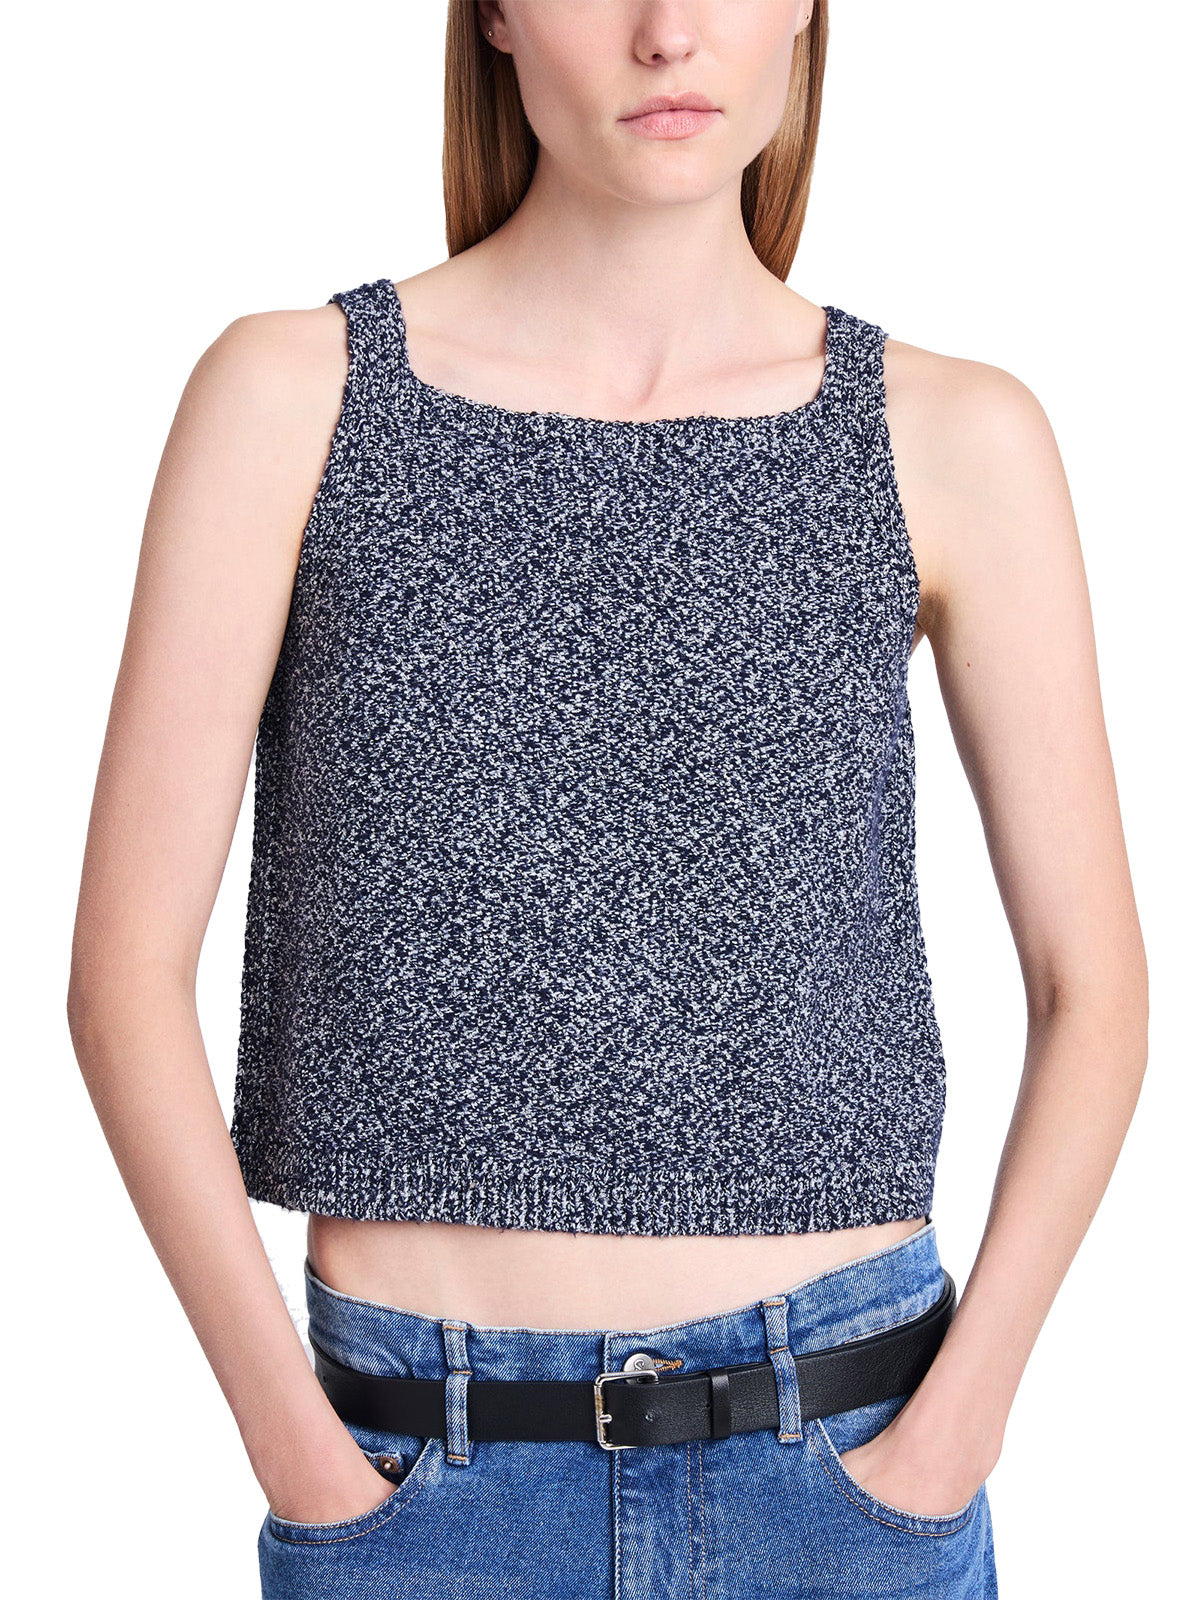 Drew Top in Marled Knits